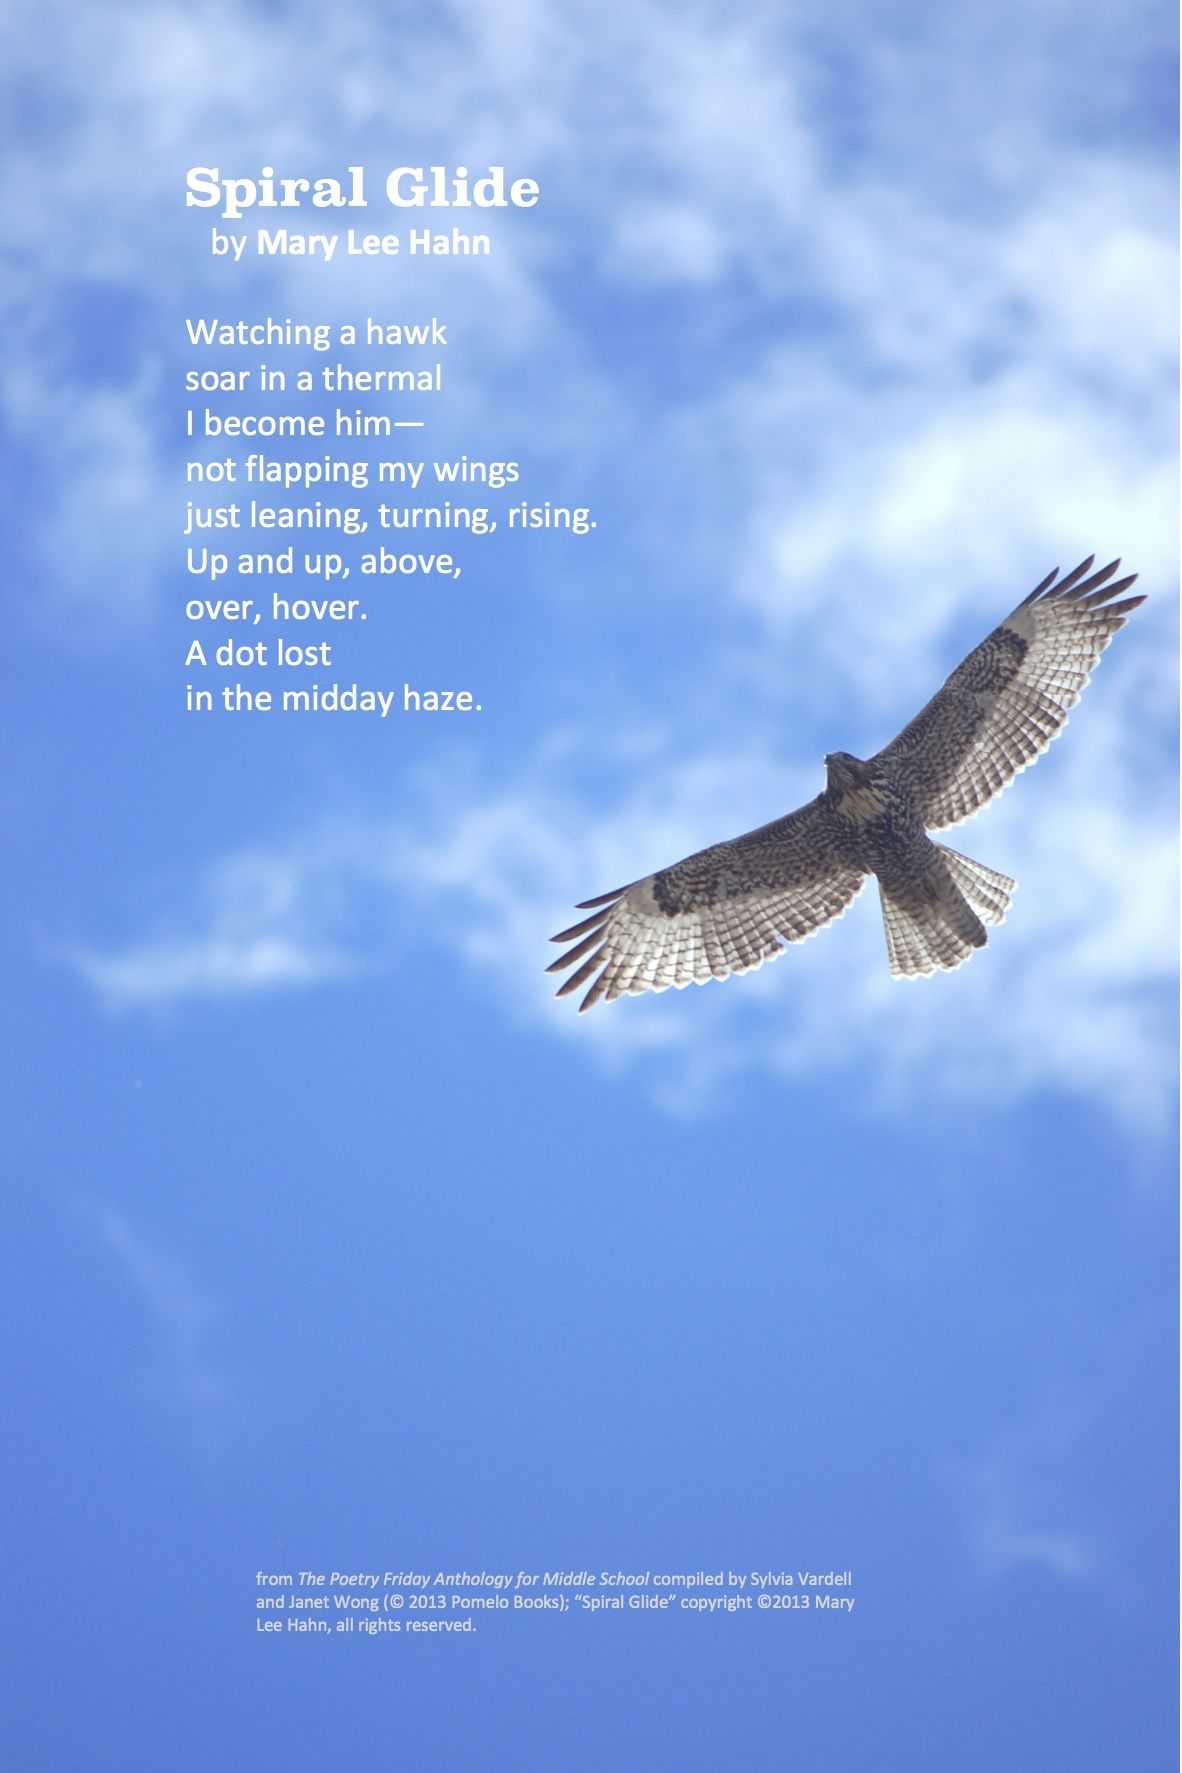 Animal Adaptations Worksheets or This thoughtful Poem "spiral Glide" by Mary Lee Hahn From the